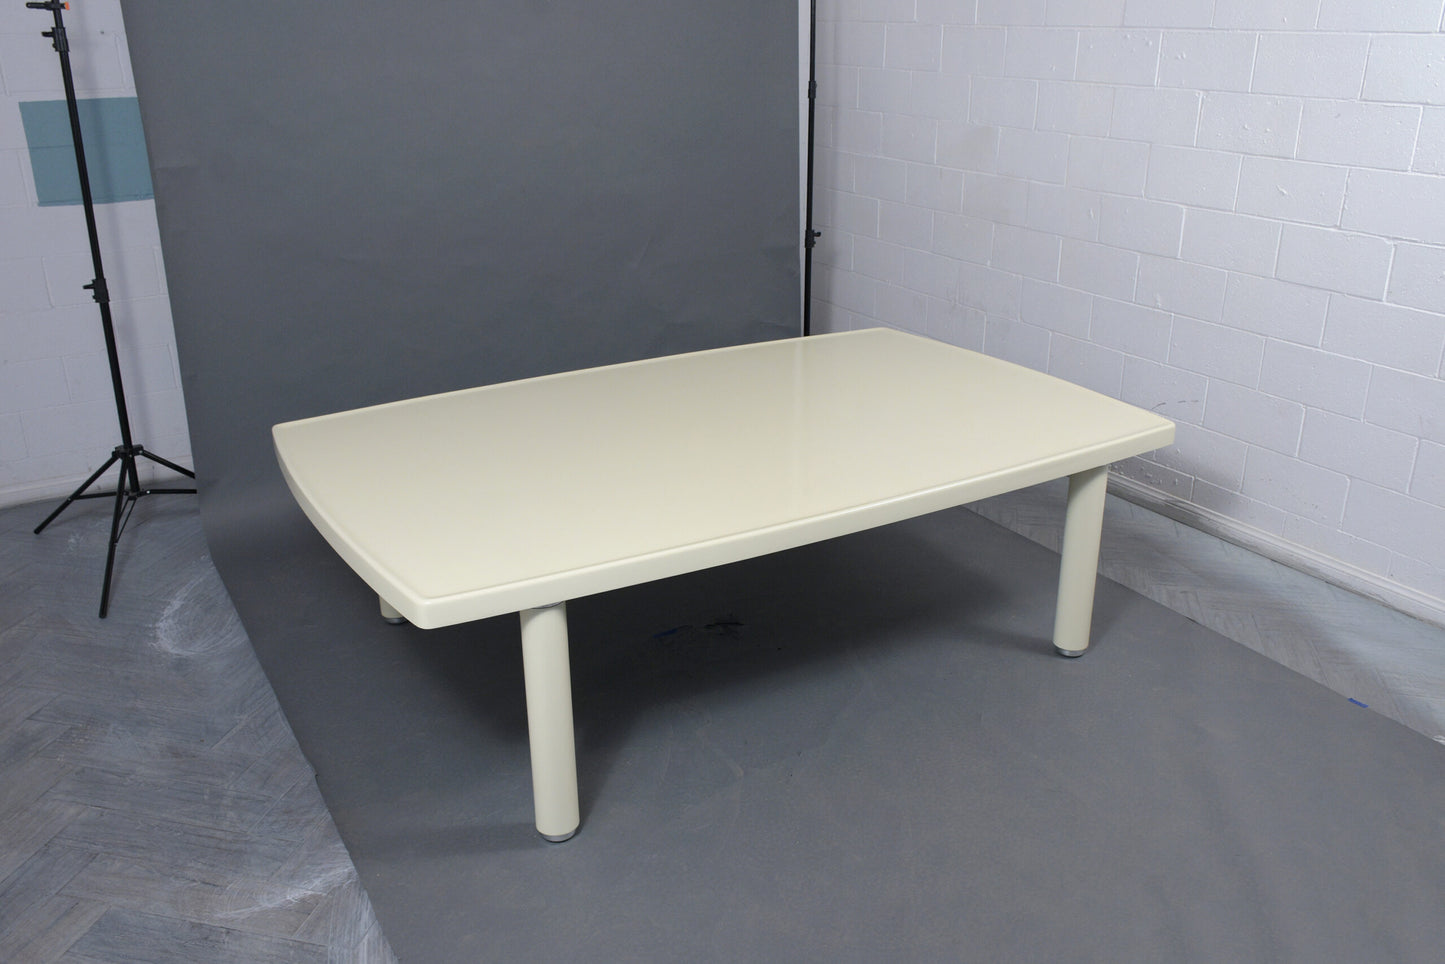 Stewart MacDougall Ivory Cream Dining Table with Silvered Leg Details